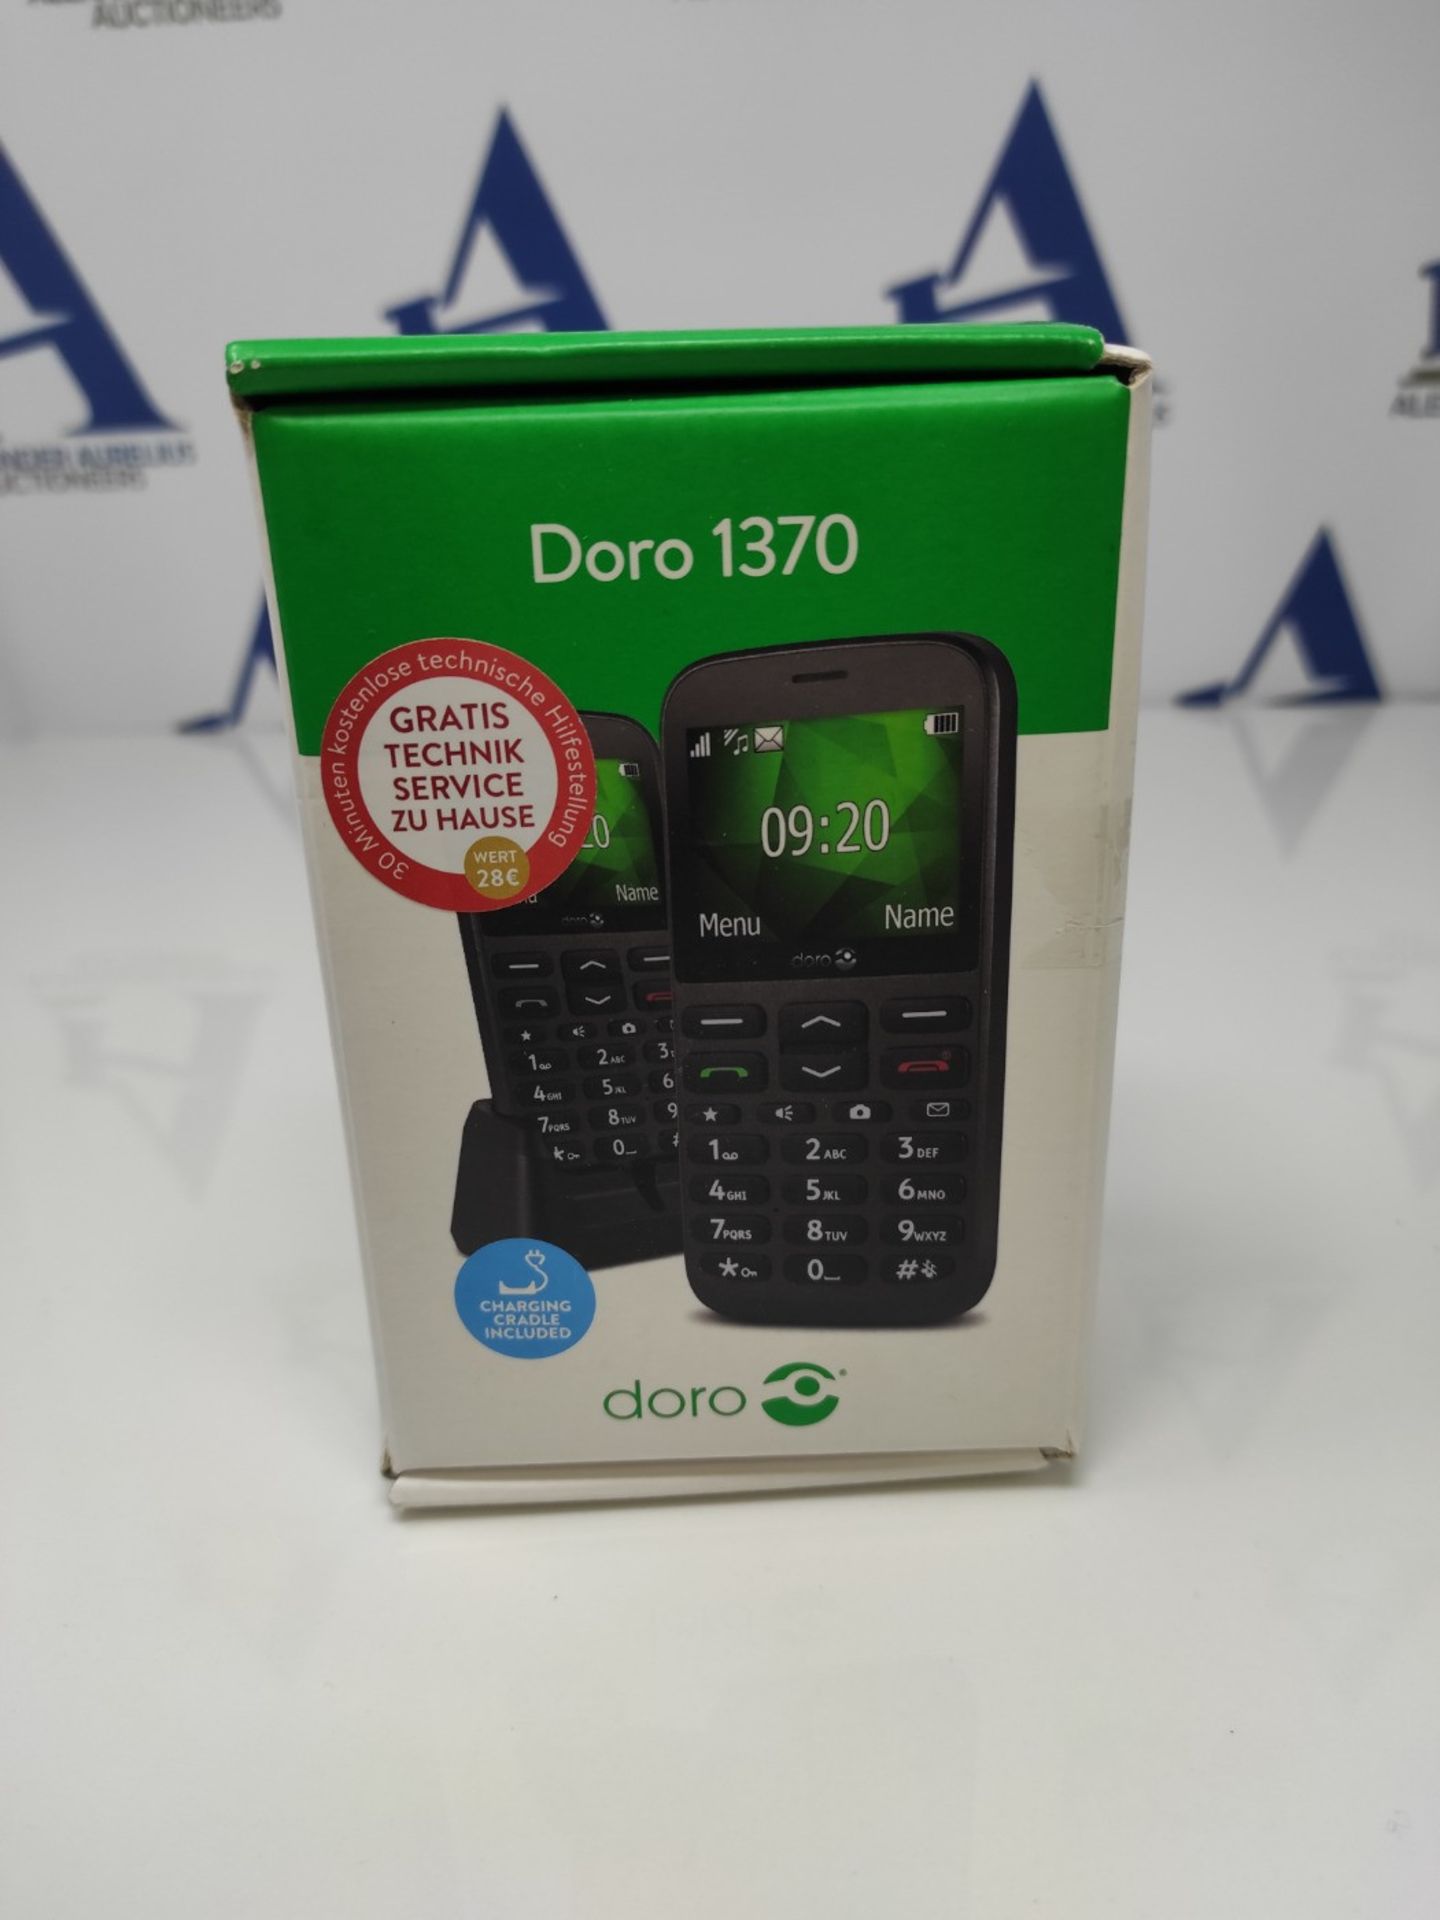 Doro 1370 GSM mobile phone with camera (3 MP, HAC, Bluetooth), anthracite - Image 2 of 3